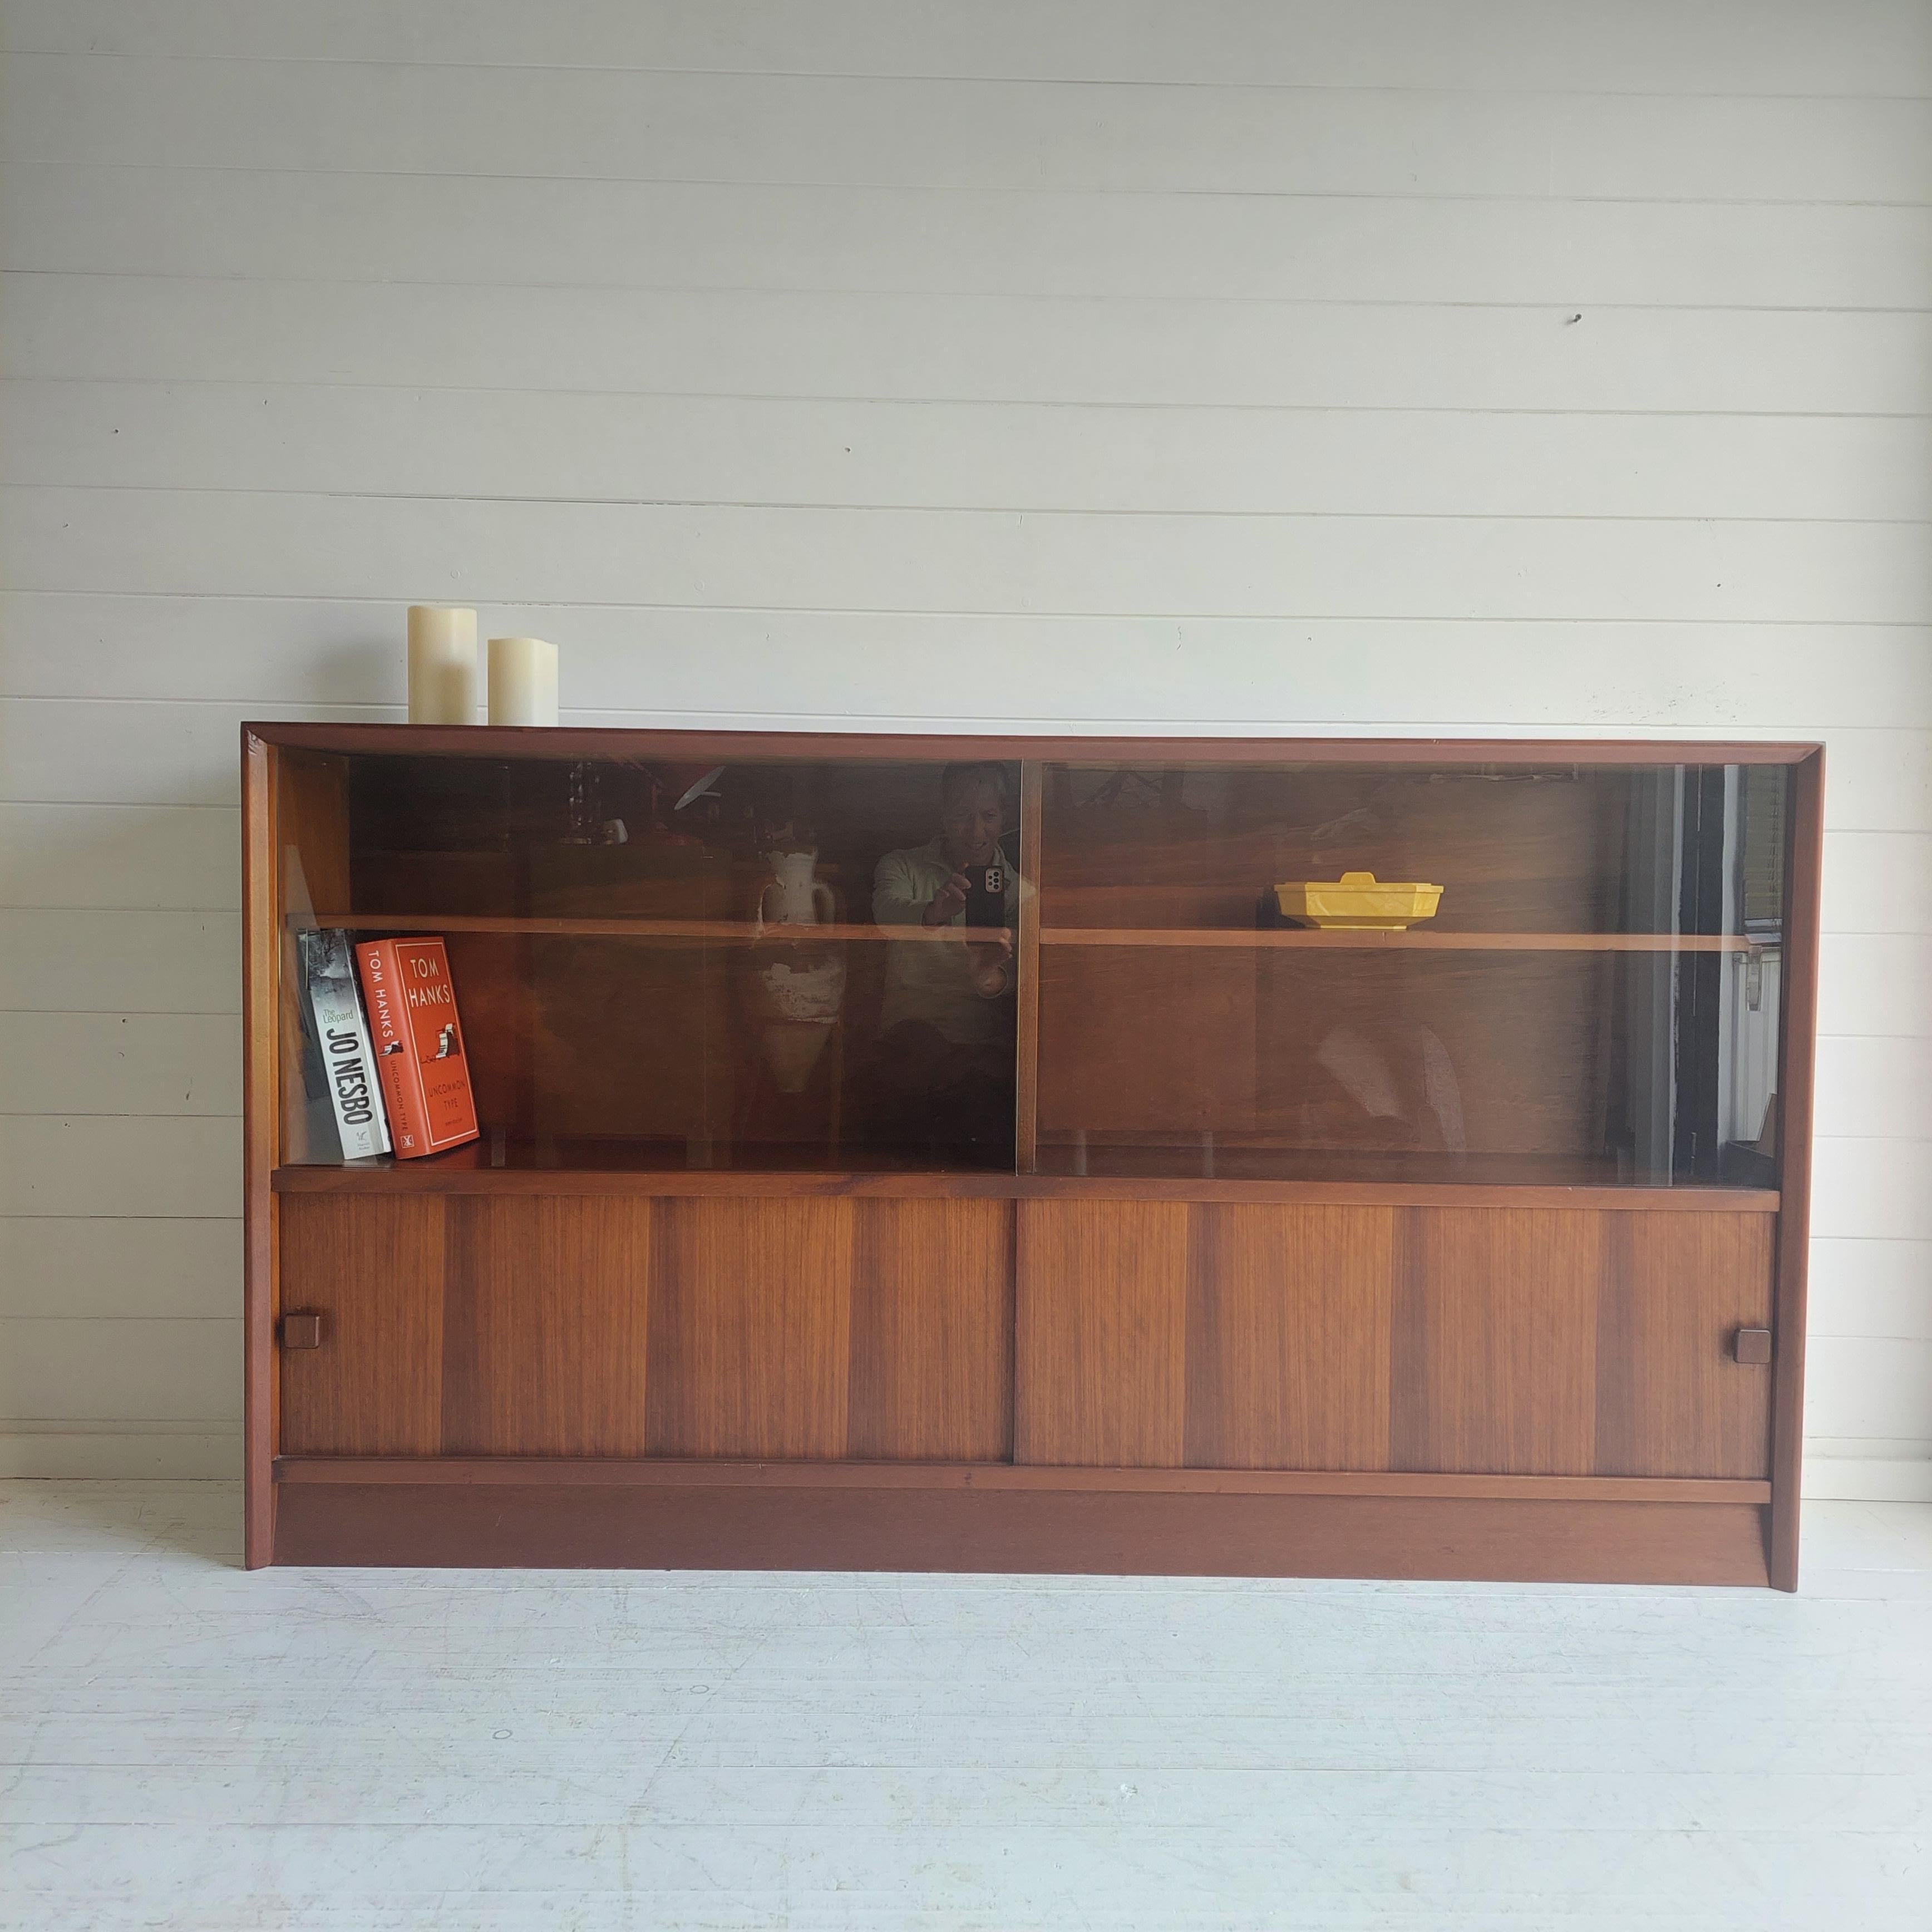 Mid Century bookshelf cabinet sideboard by Herbert E Gibbs, 1960s
LARGE VINTAGE 1960S HERBERT E GIBBS MODEL 916 BOOKCASE WITH LOWER CUPBOARD
Formed part of Herbert E Gibbs limited edition Autograph range

Practical storage pieces like this bookcase